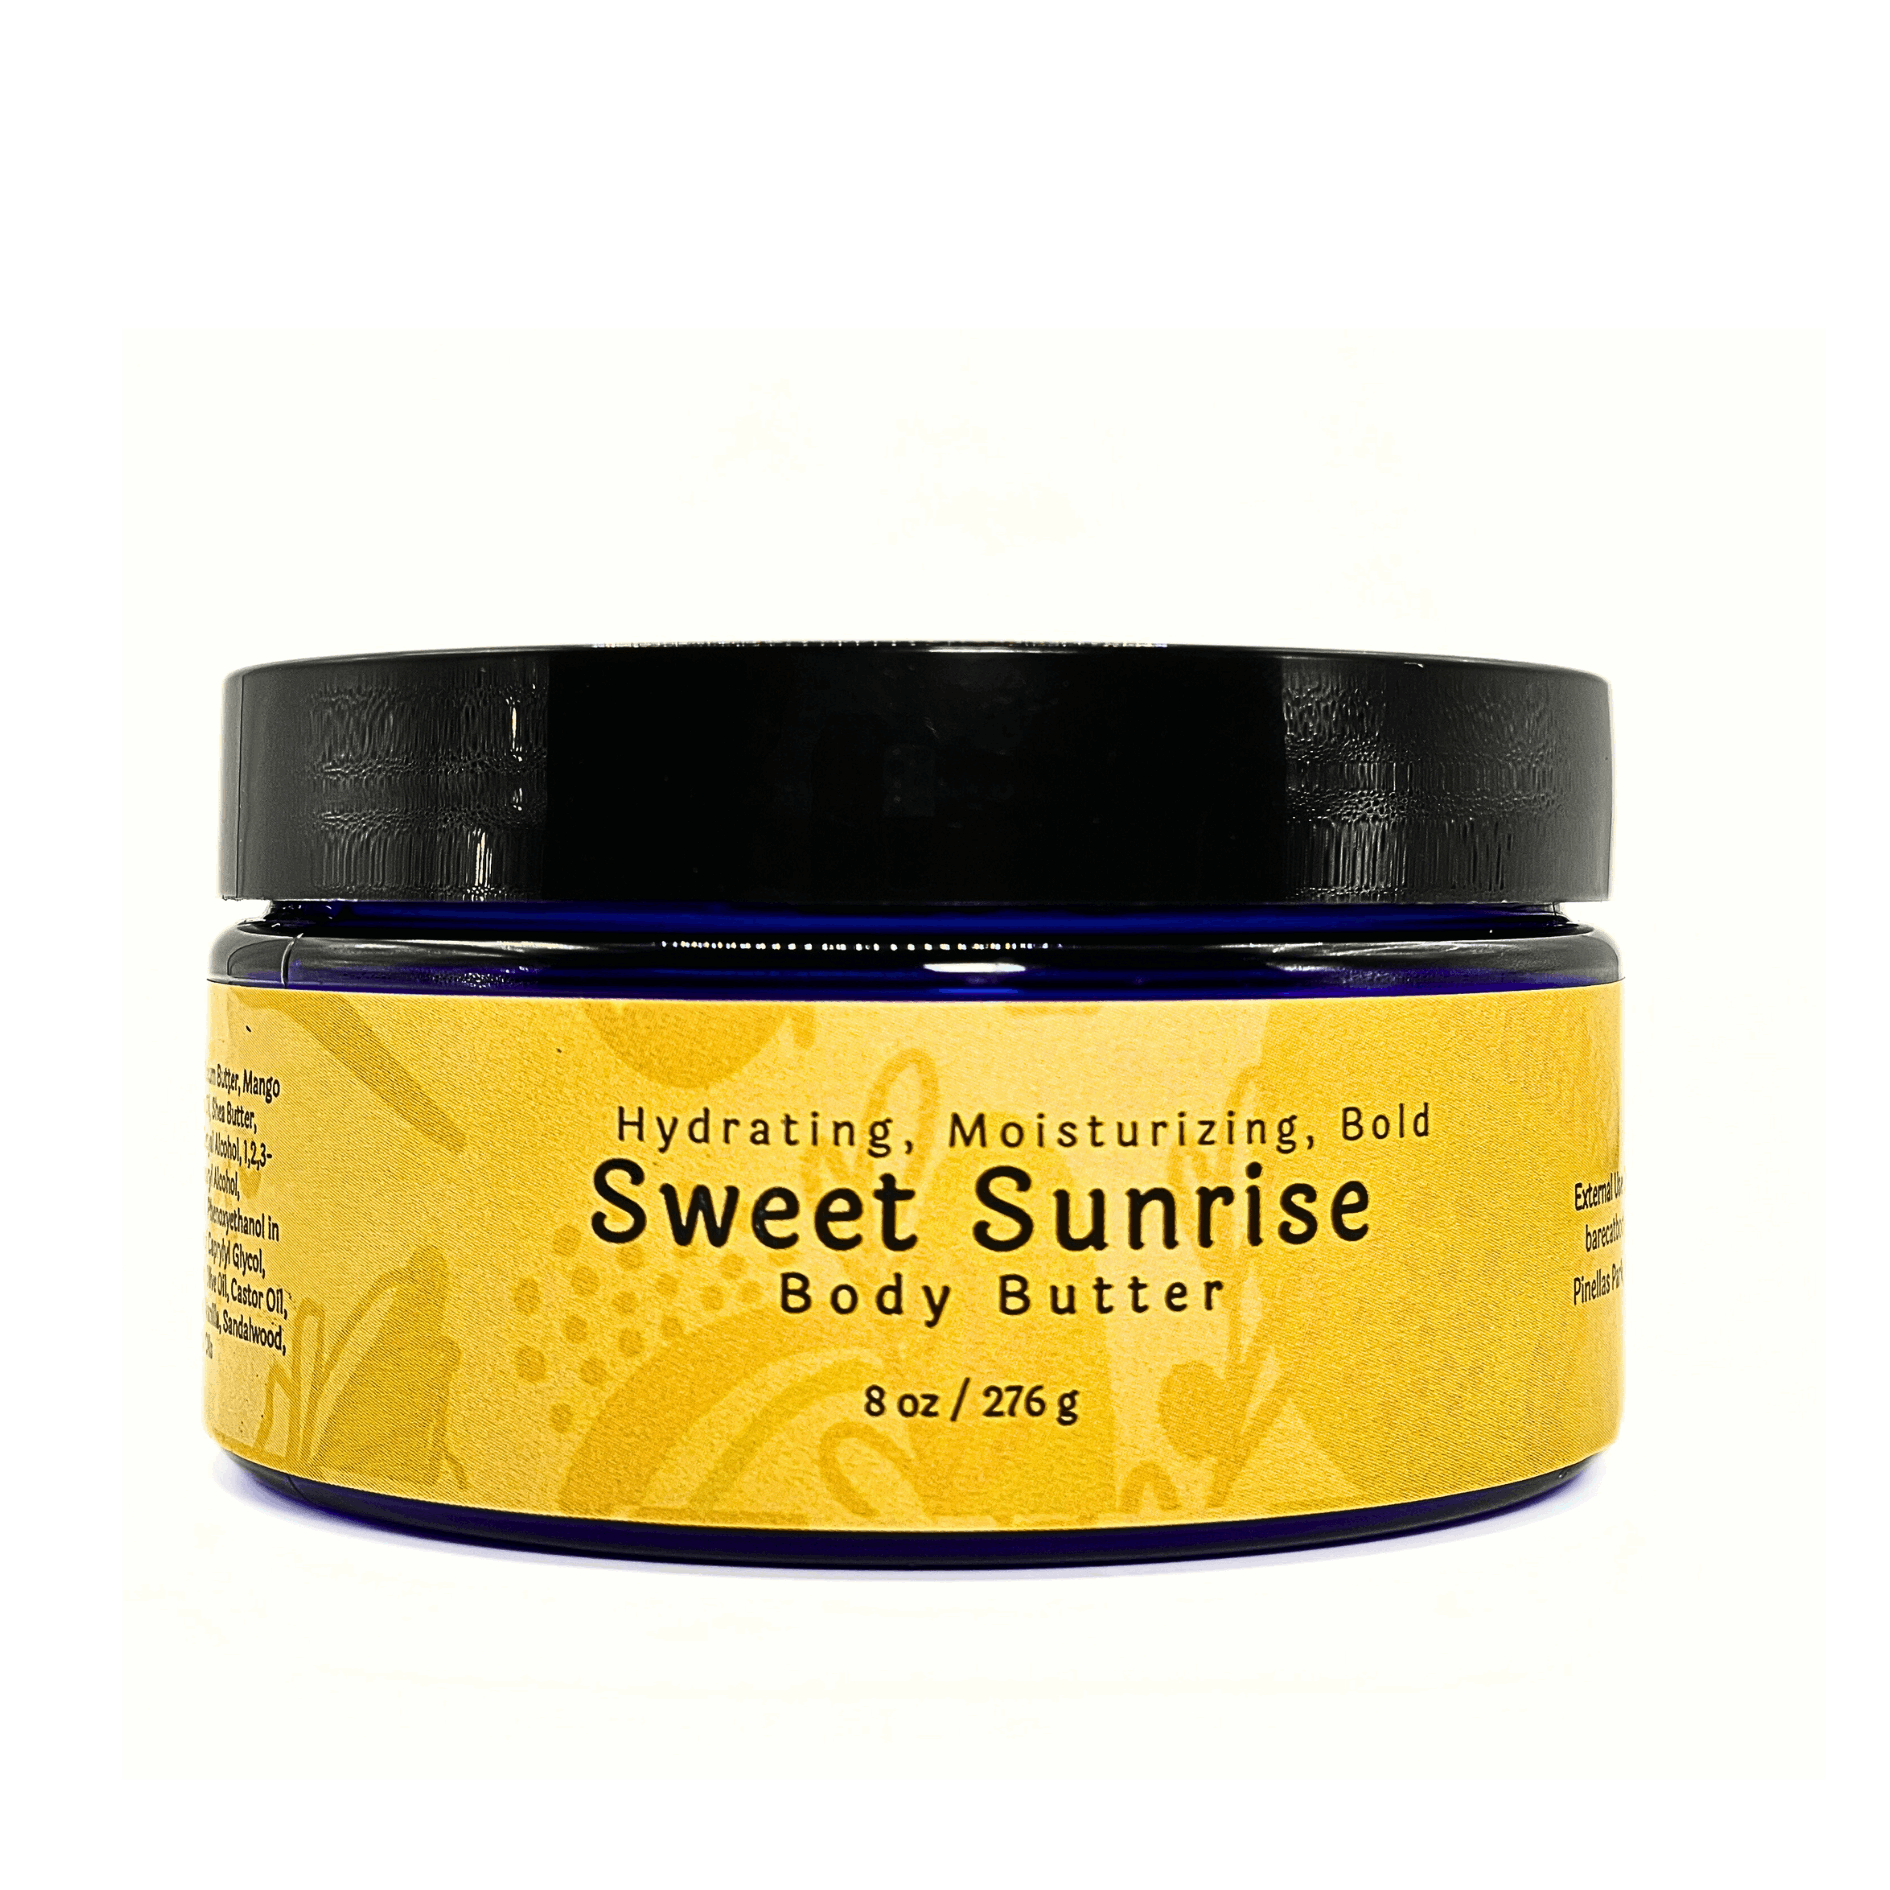 Jar of Sweet Sunrise Body Butter showcasing its creamy texture and elegant packaging.